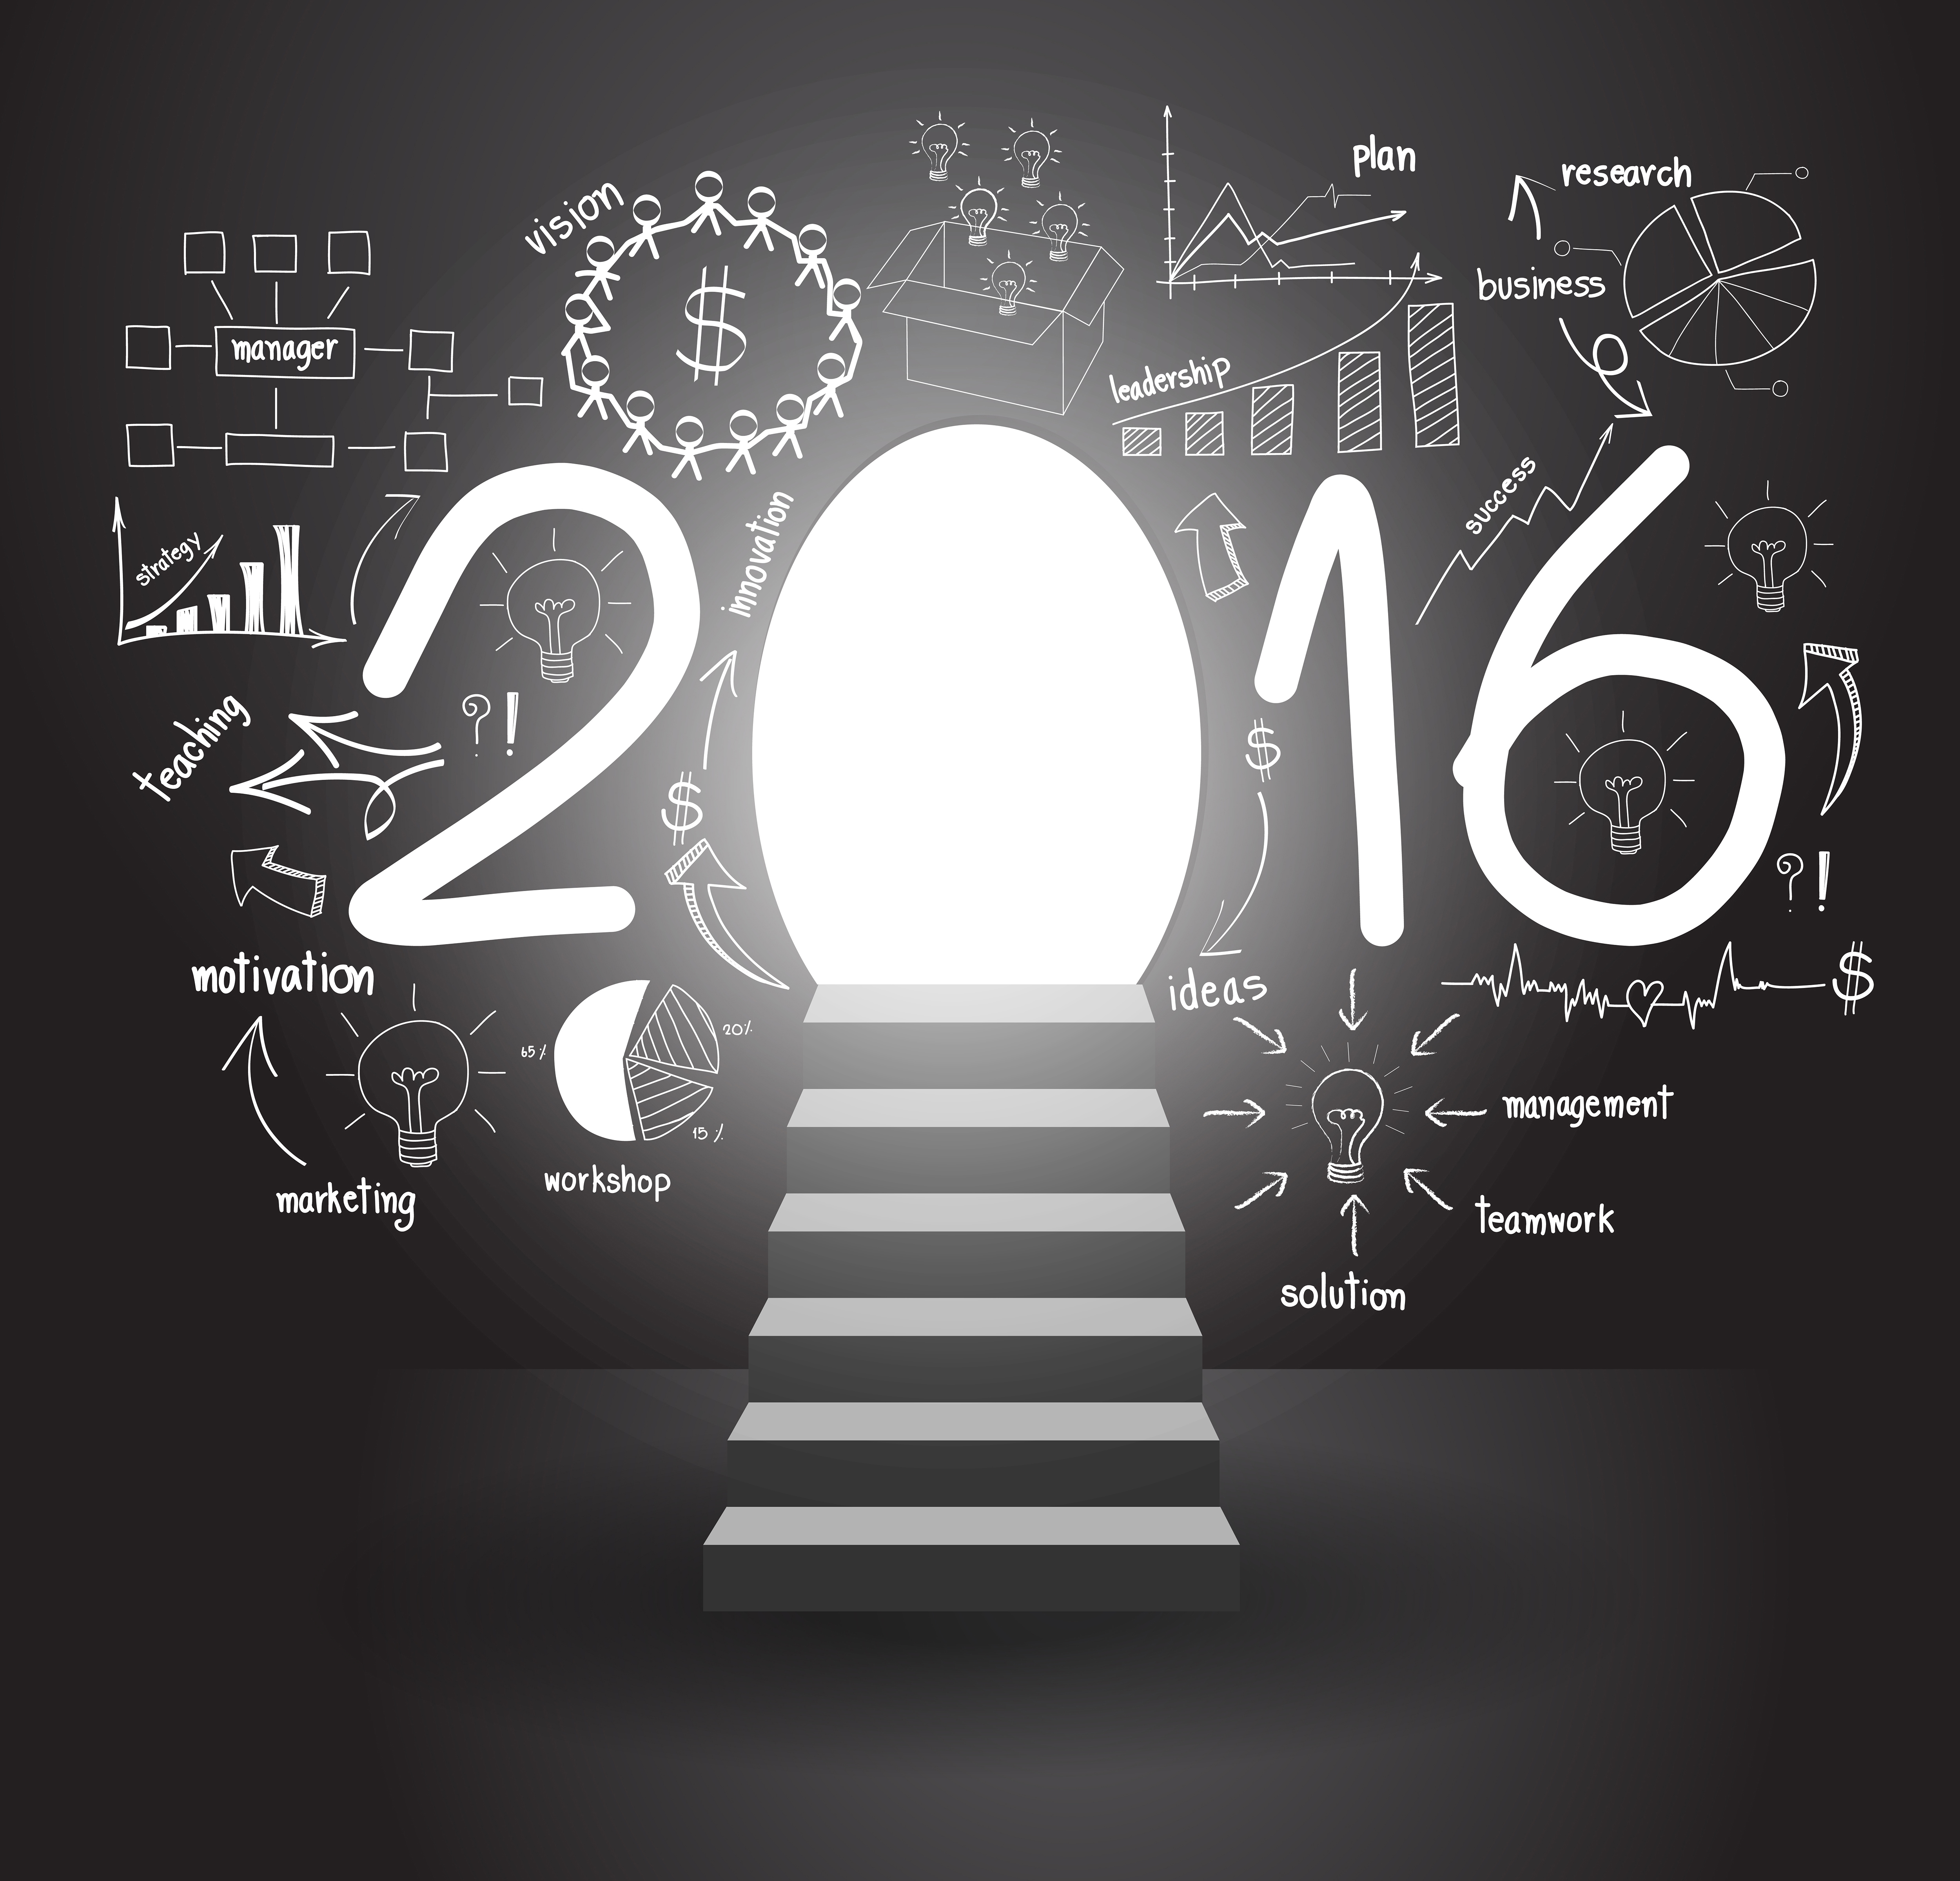 predictions for smes in 2016 – guidelines to survival and growth